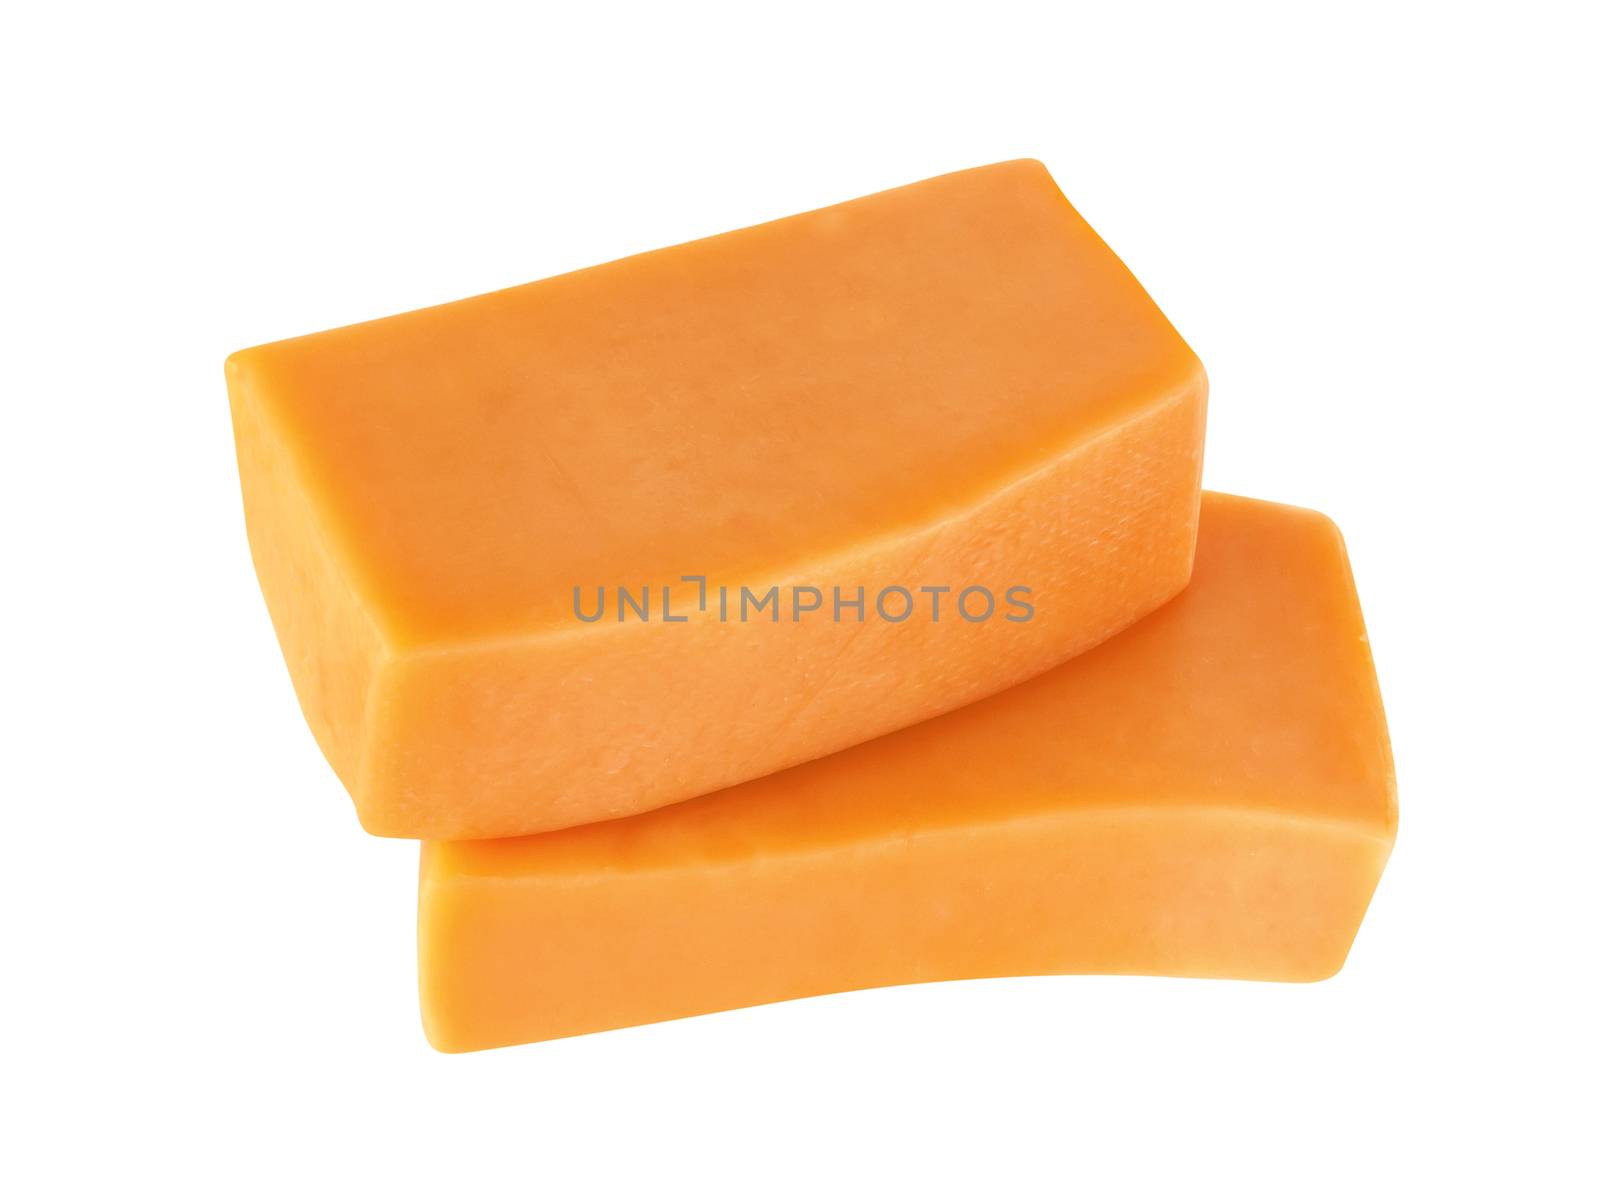 Cheddar cheese isolated on white background by xamtiw